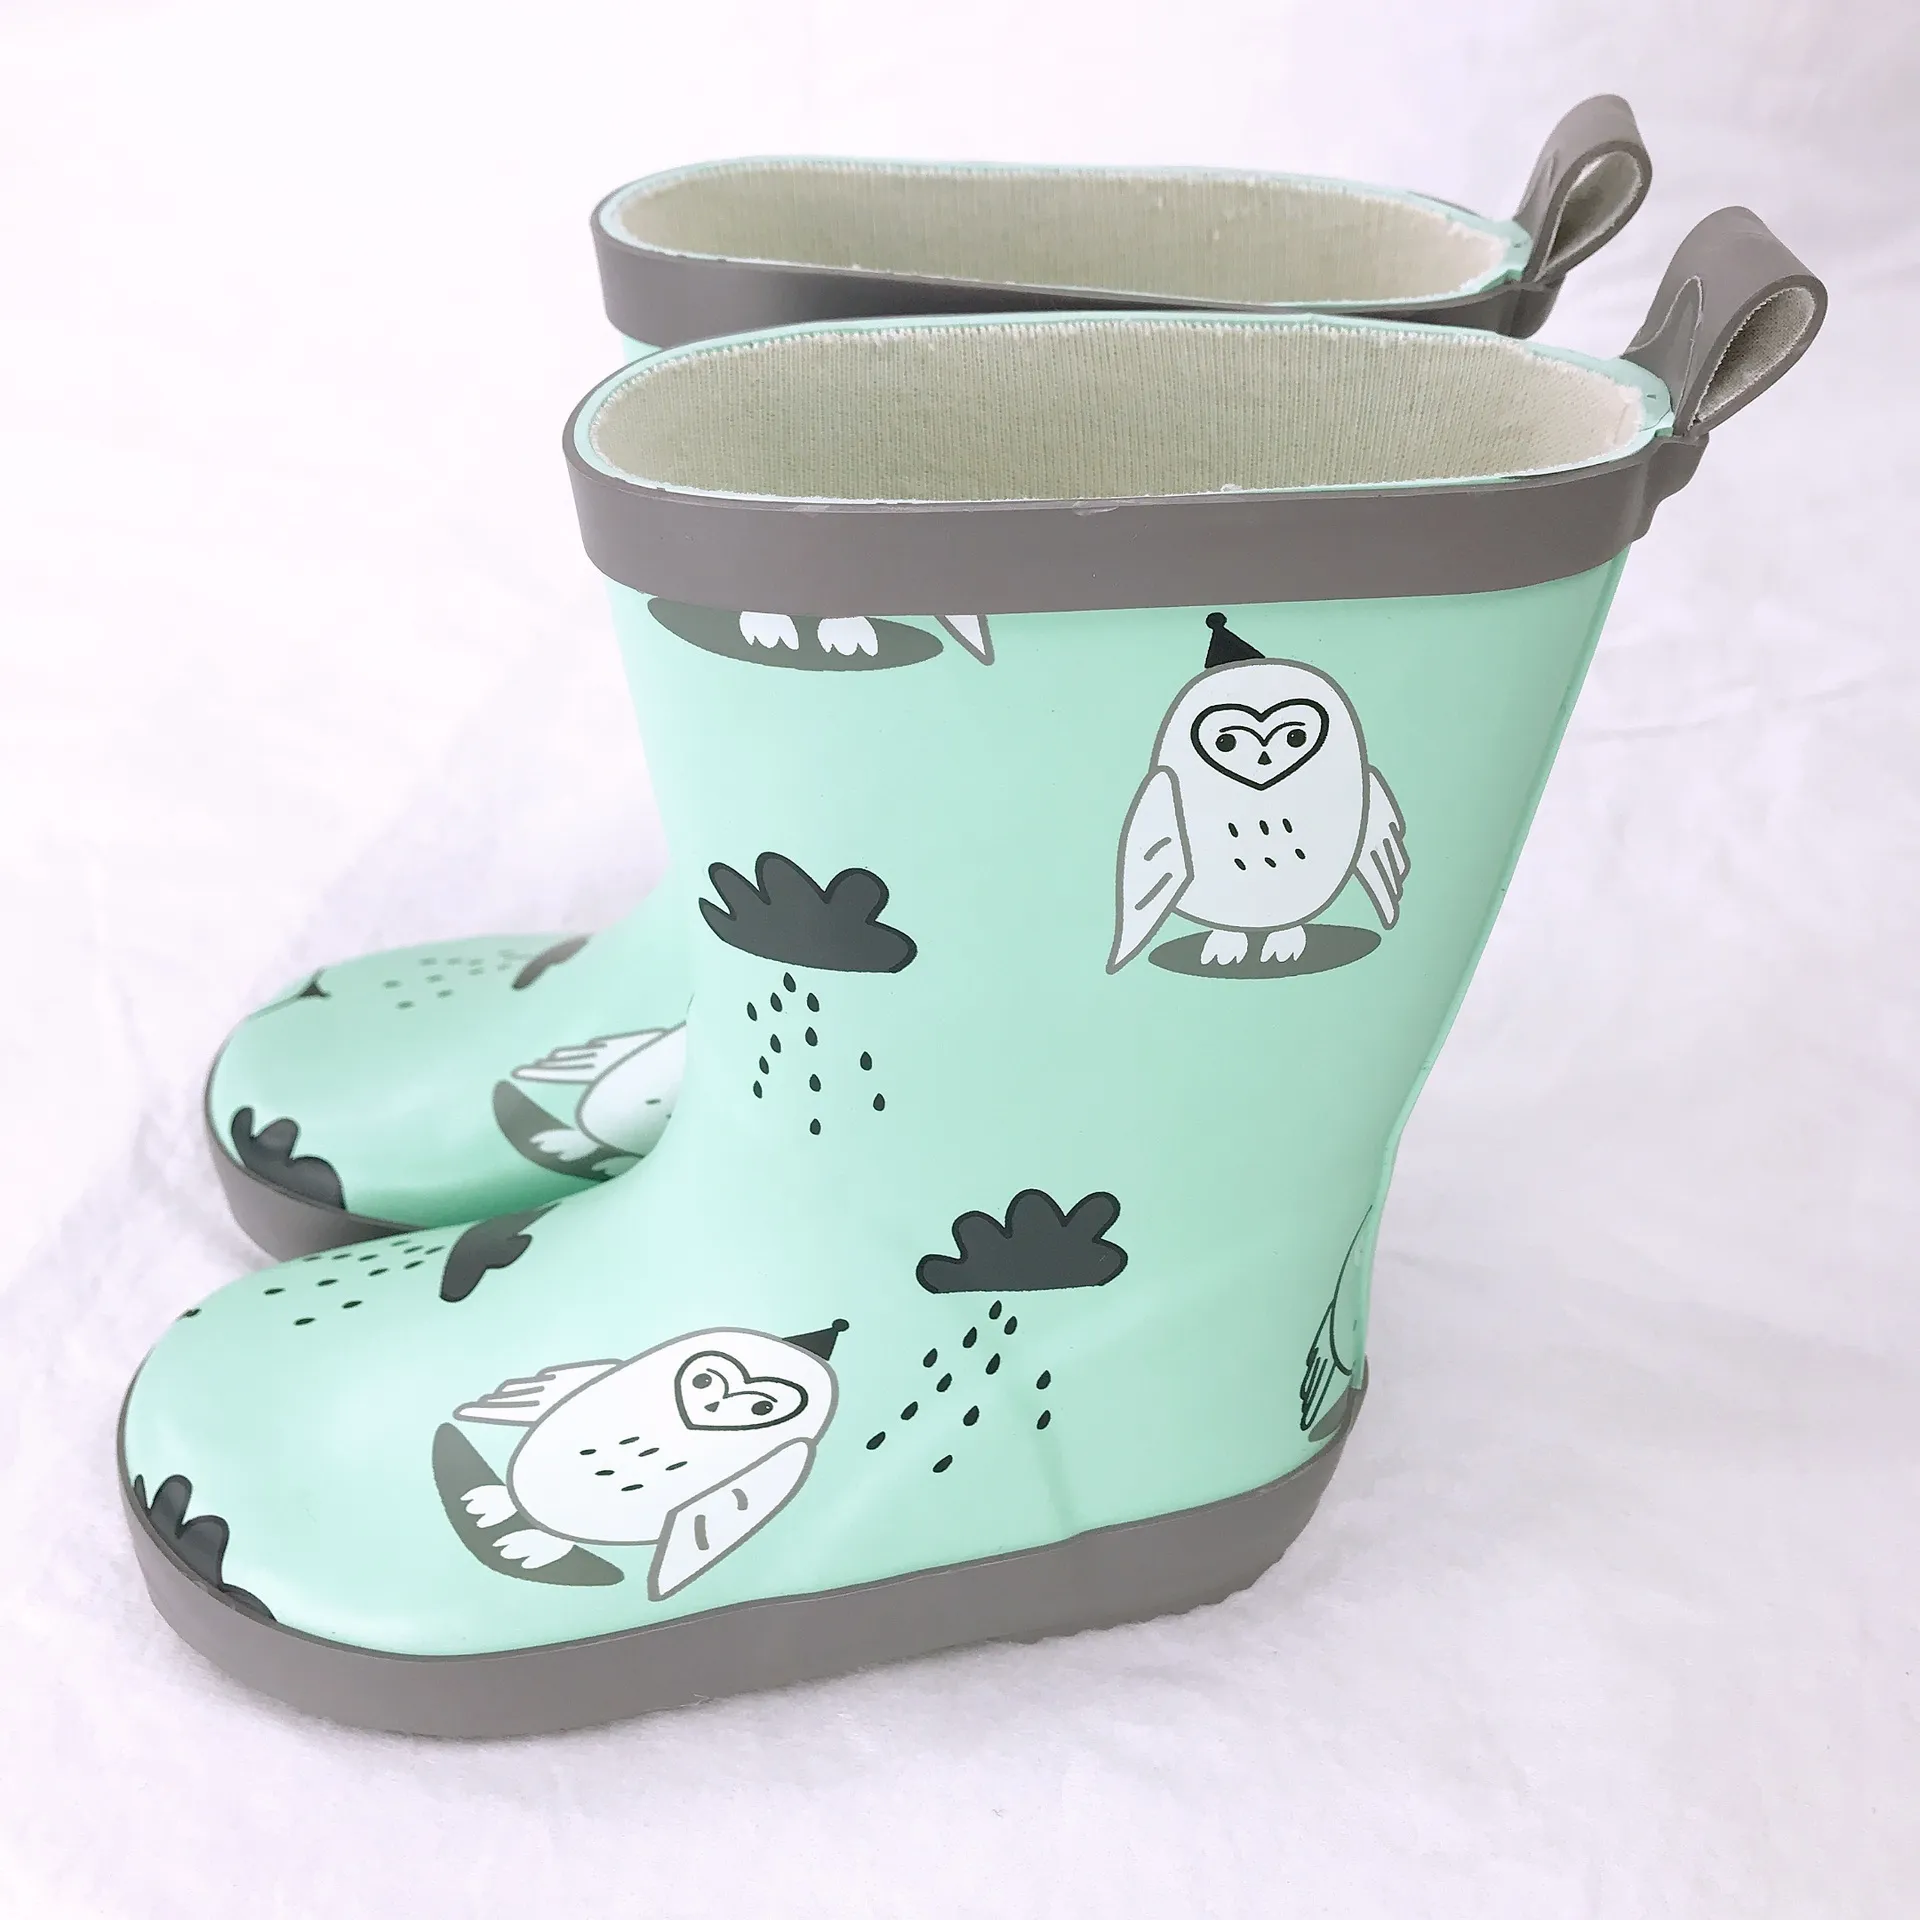 Girls Boy Rubber Rain Boots Kids Girl Printed Children's Rubber Boots Waterproof Soft rain shoes Baby Water Shoes size 23-32